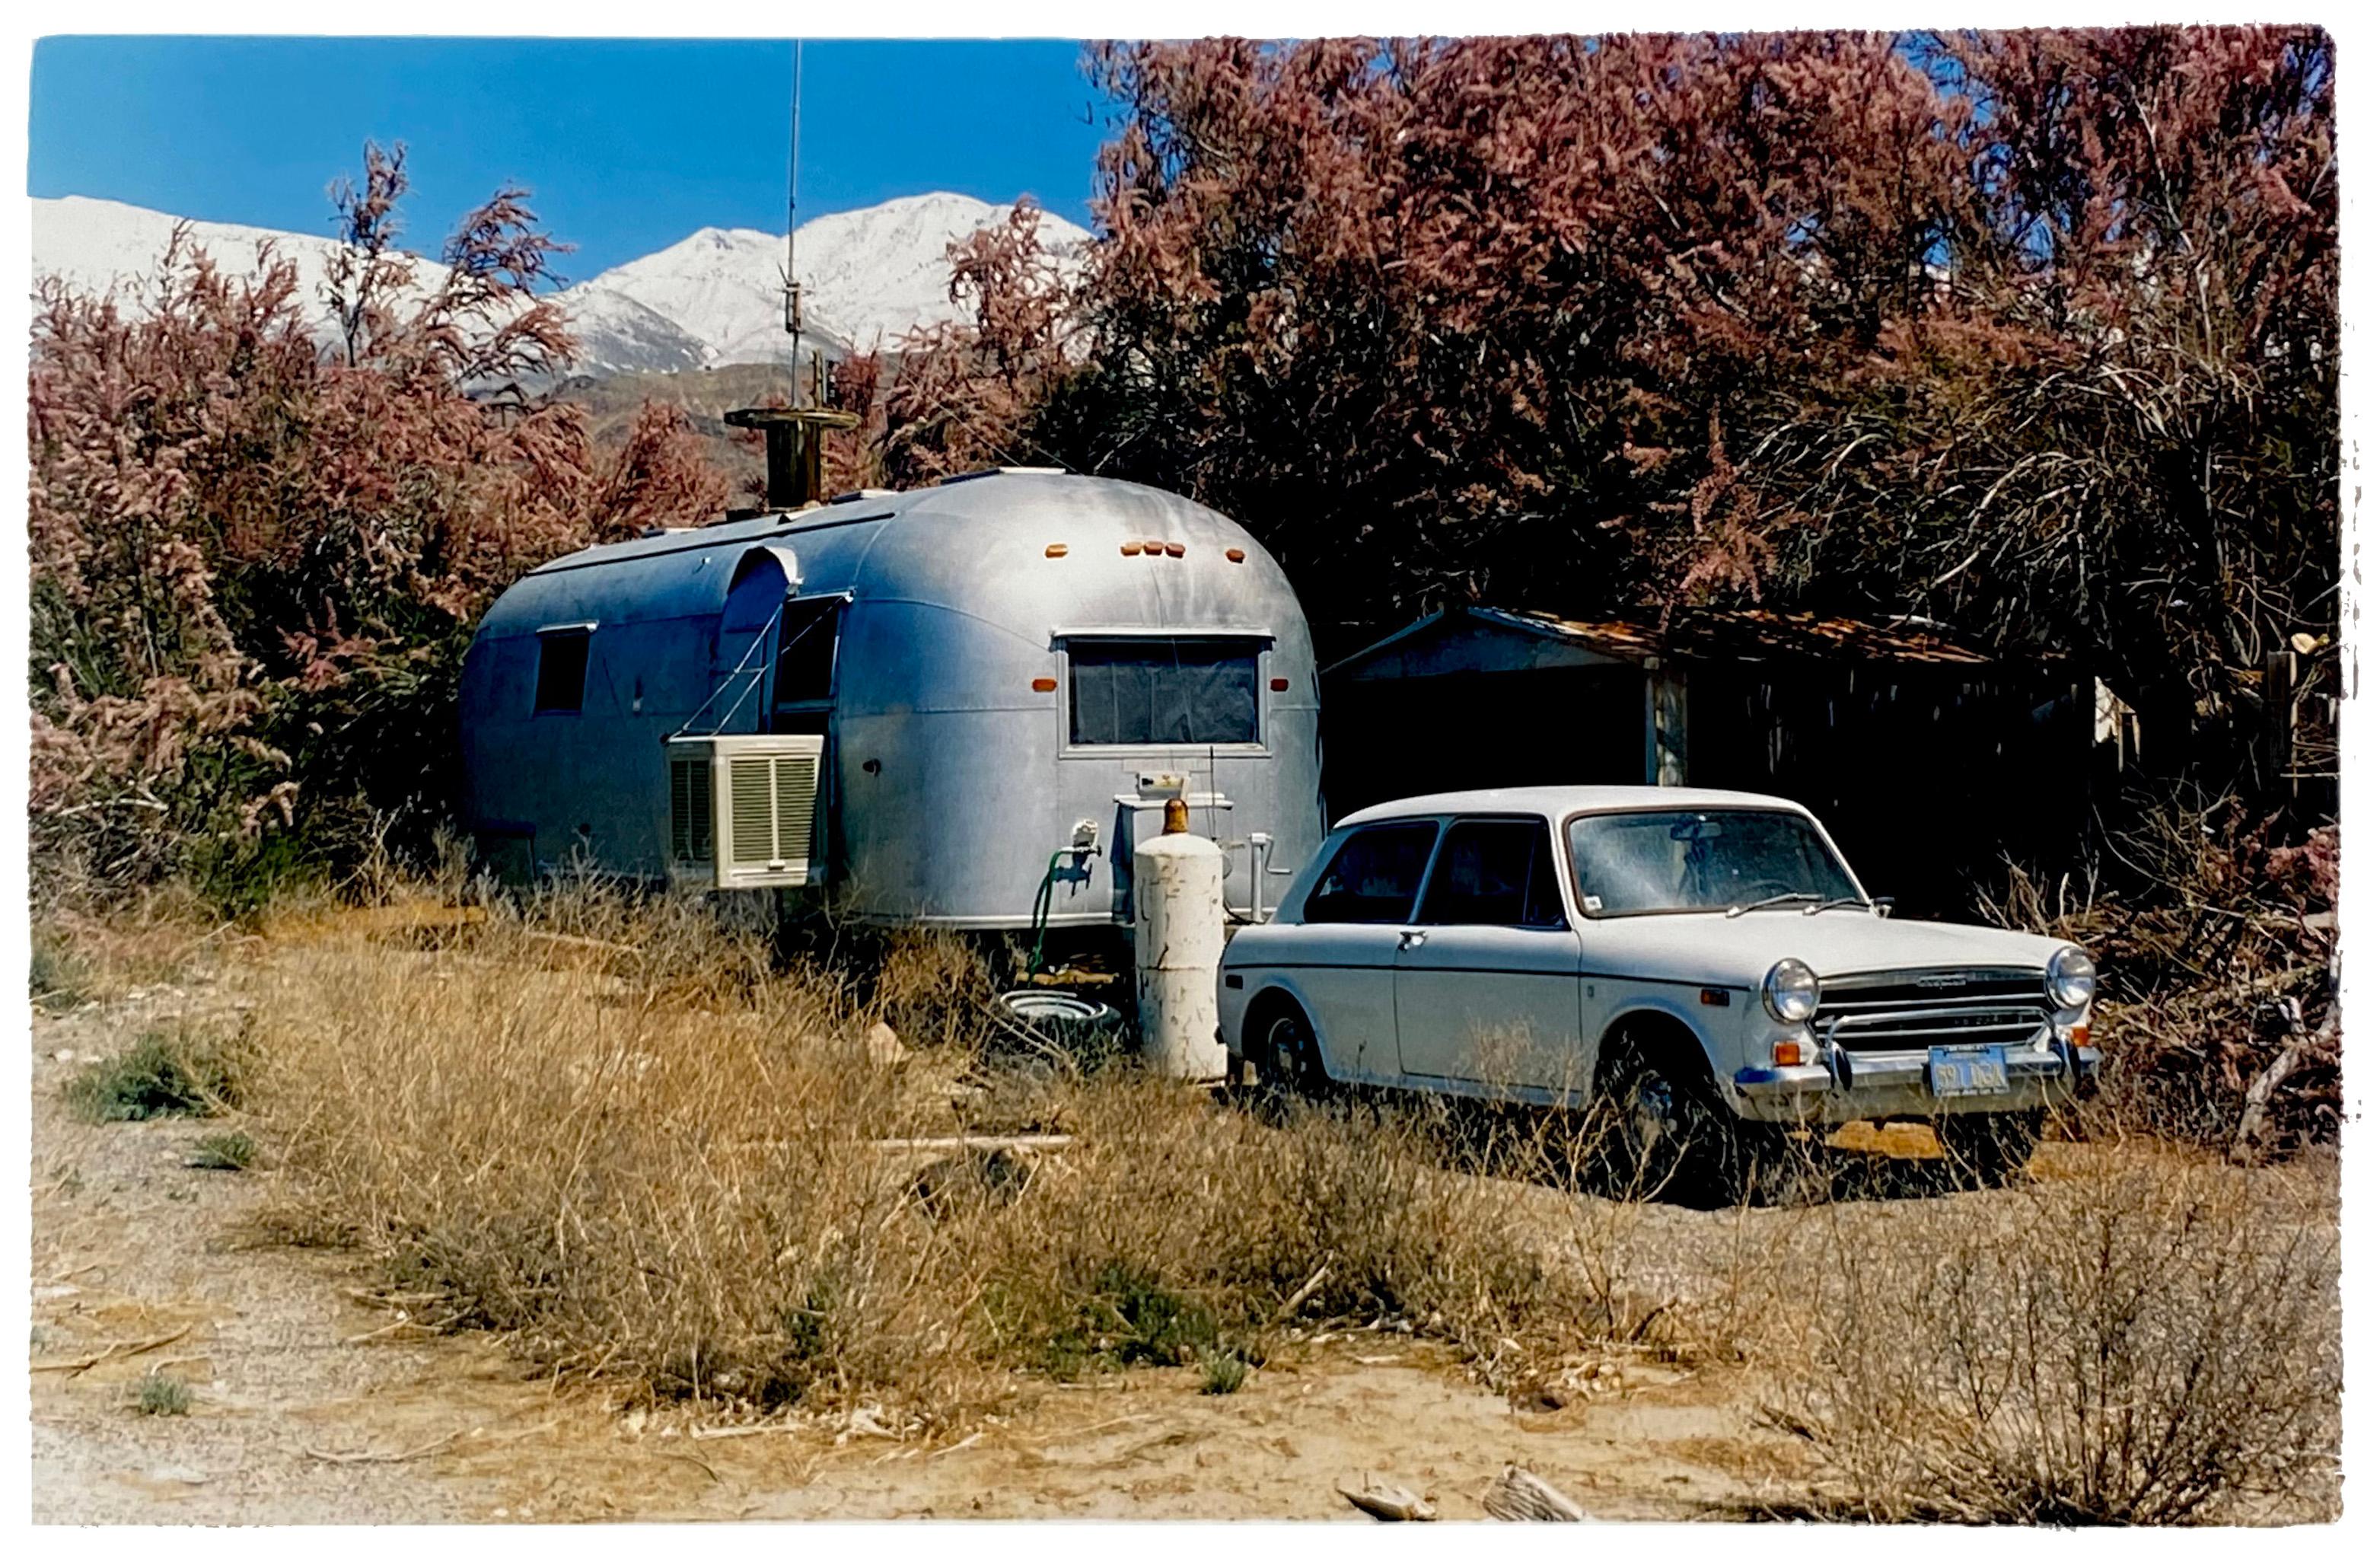 Austin and Airstream, Keeler, California - American Color Photography